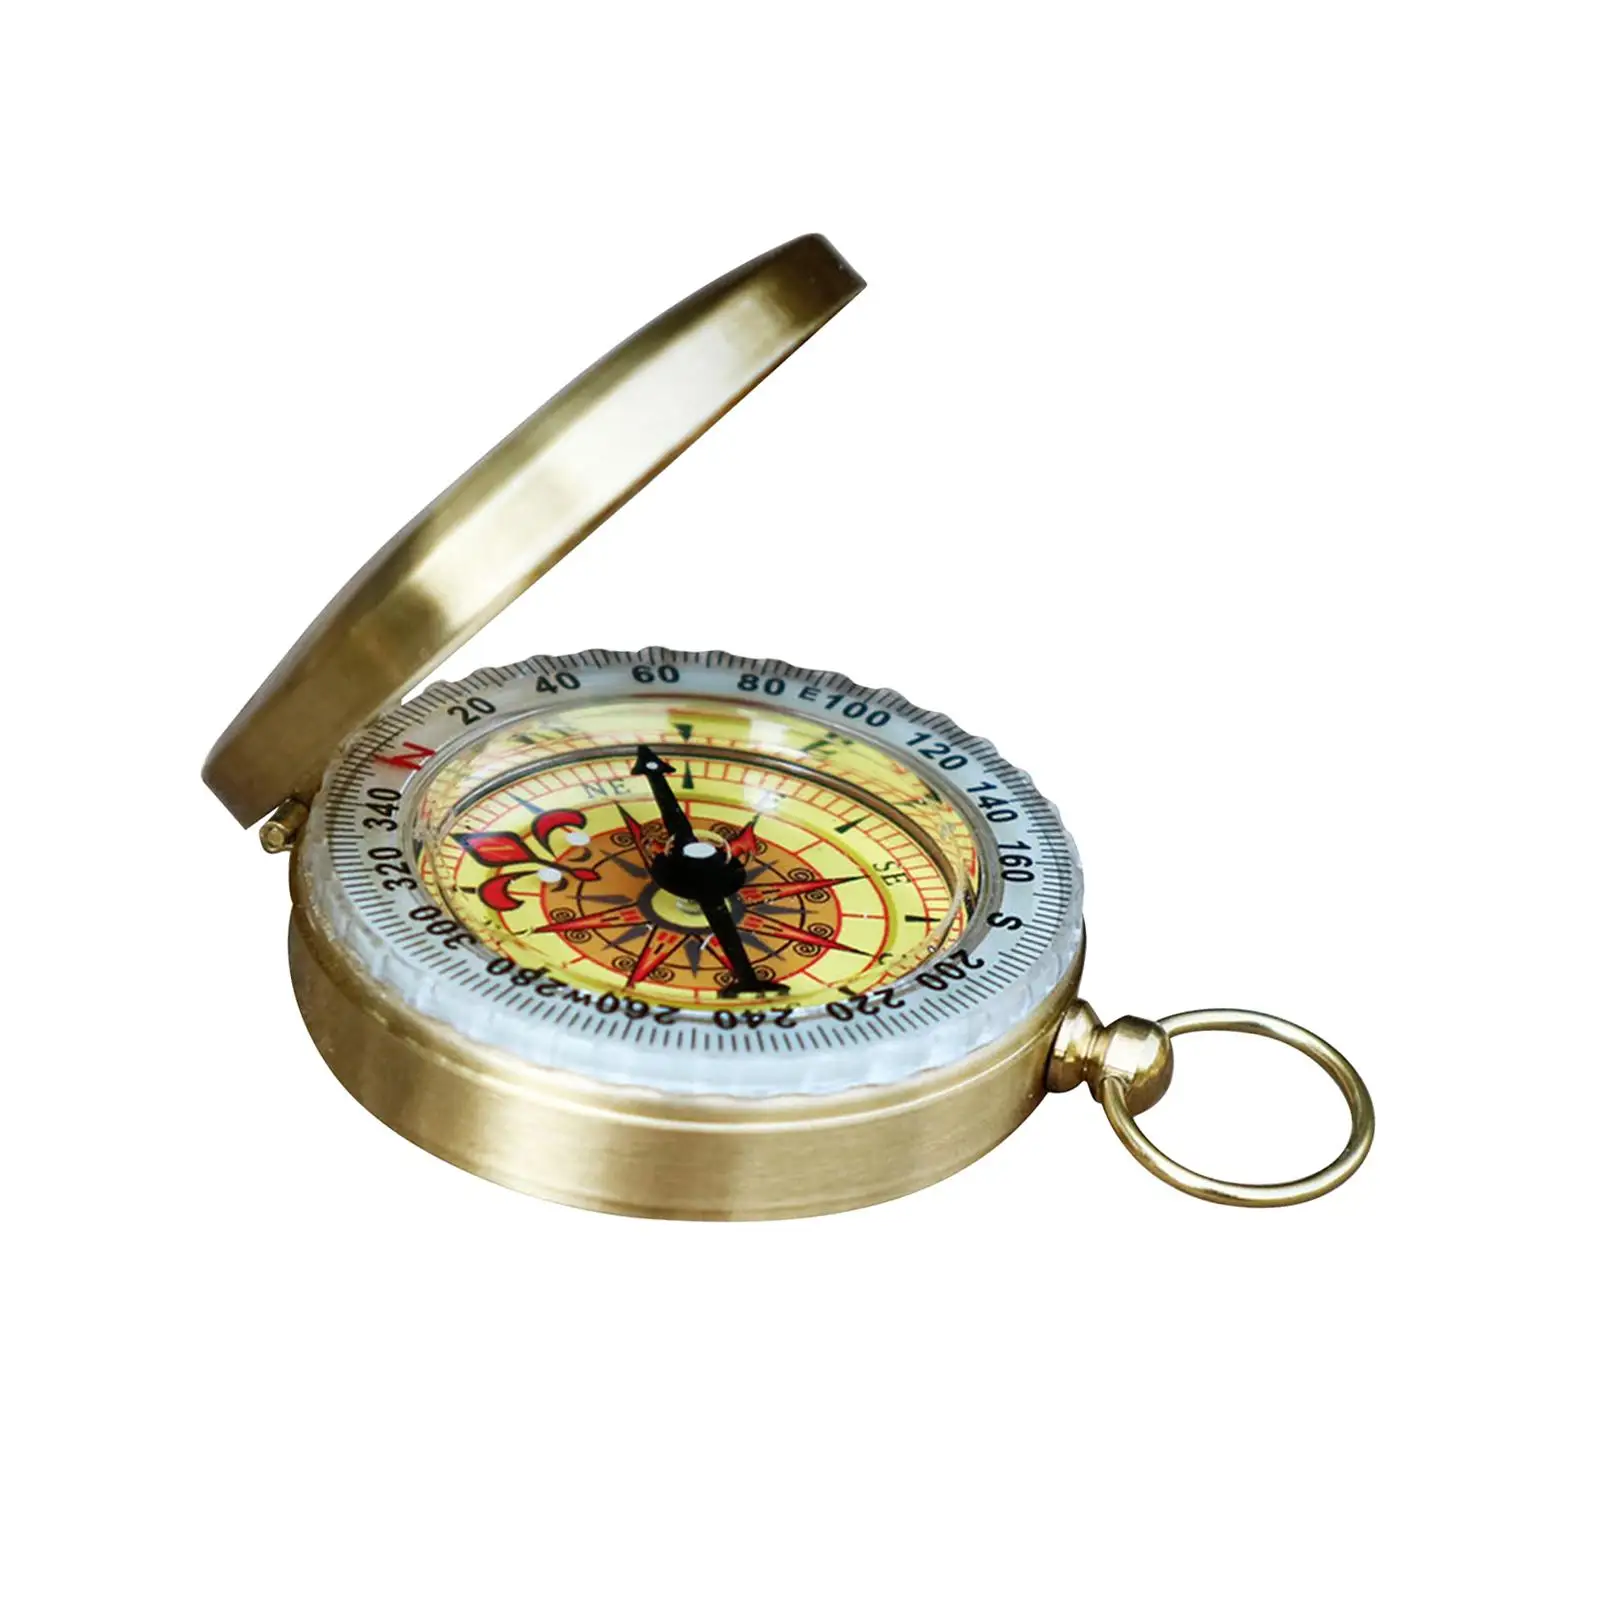 Camping Survival Compass Old Fashioned Small Compact Copper Compass Luminous Compass for Outdoor Backpacking Orienteering Hiking